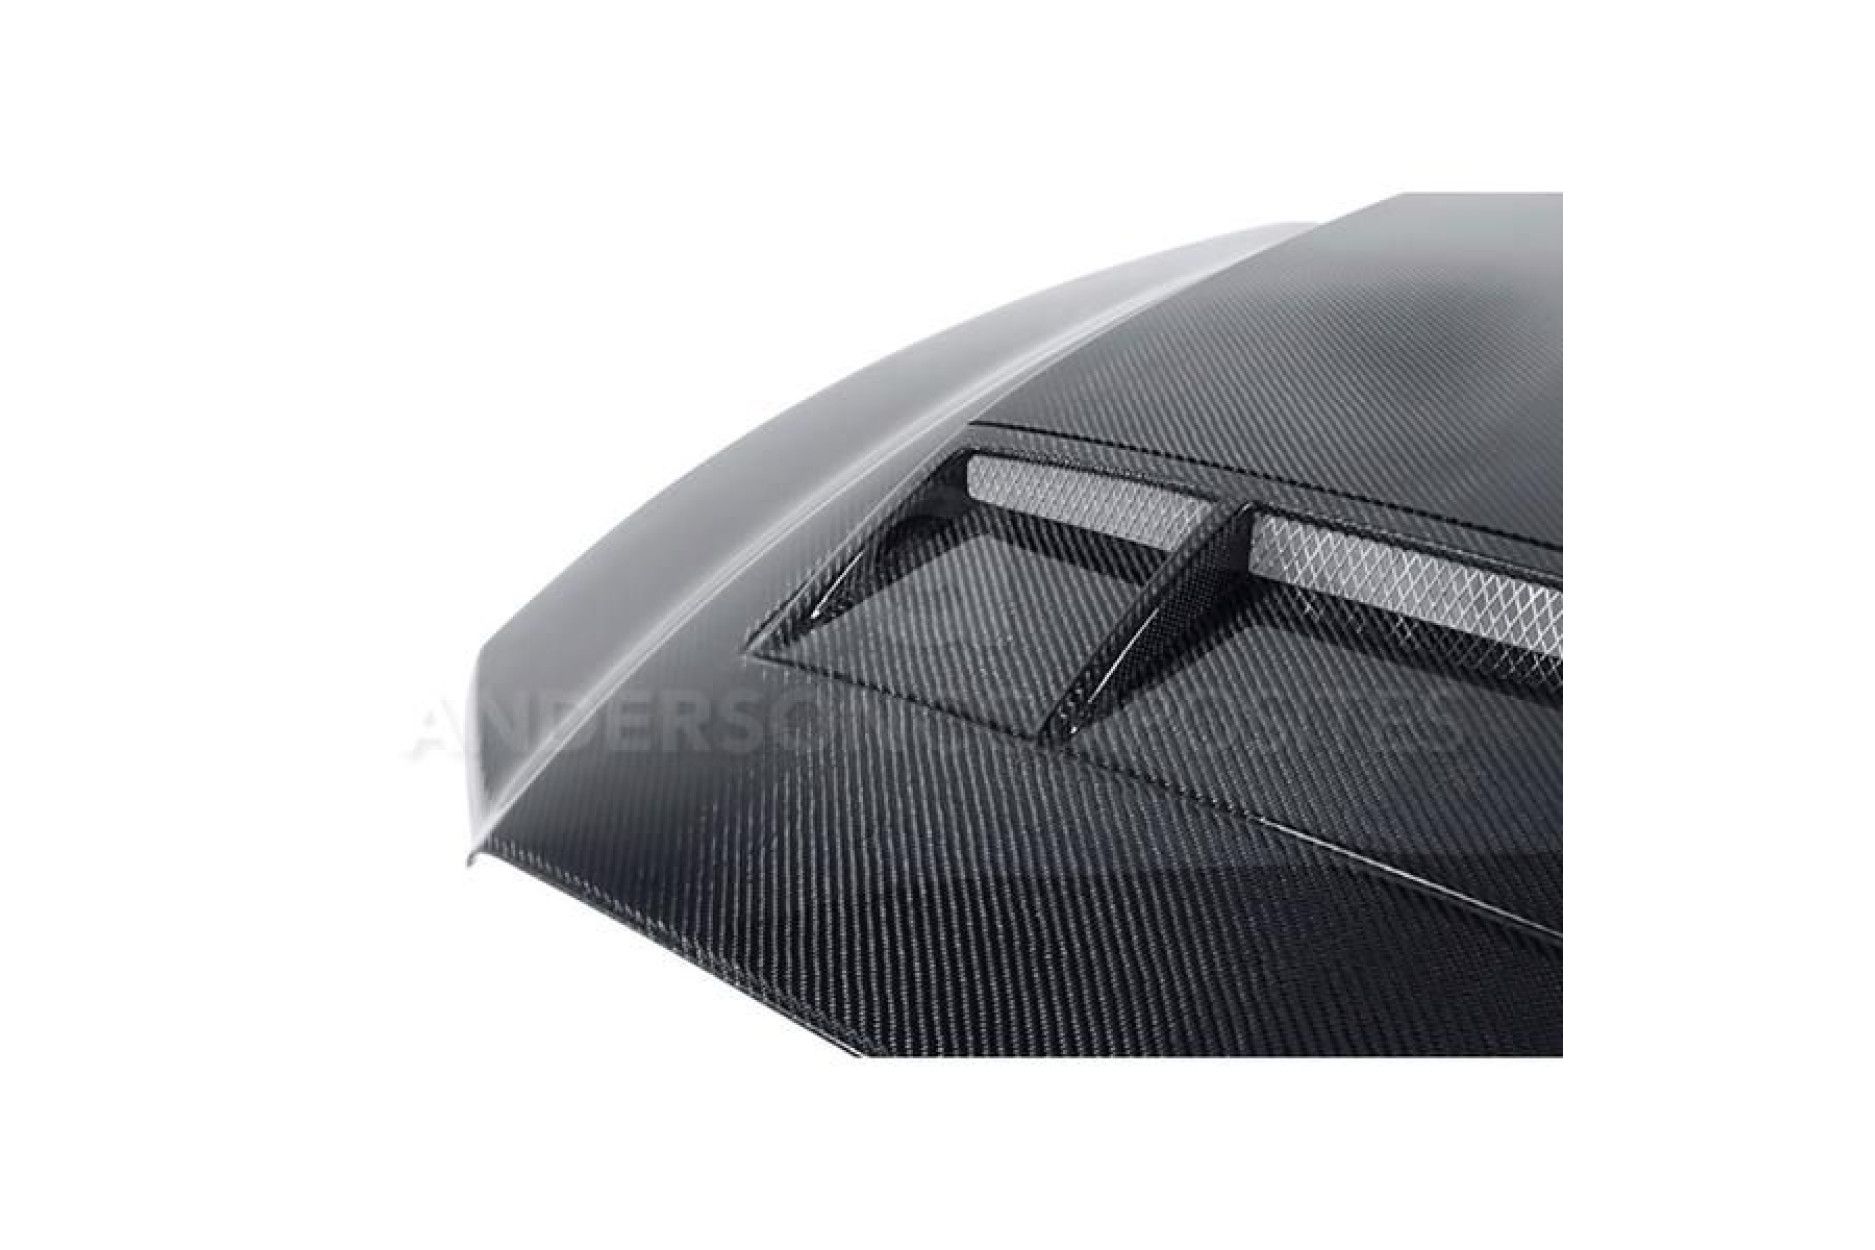 Anderson Composites Ram air type-CR carbon fiber hood for 2010-2014 Ford Mustang GT500 and 2013-2014 Mustang GT/V6 (4) 